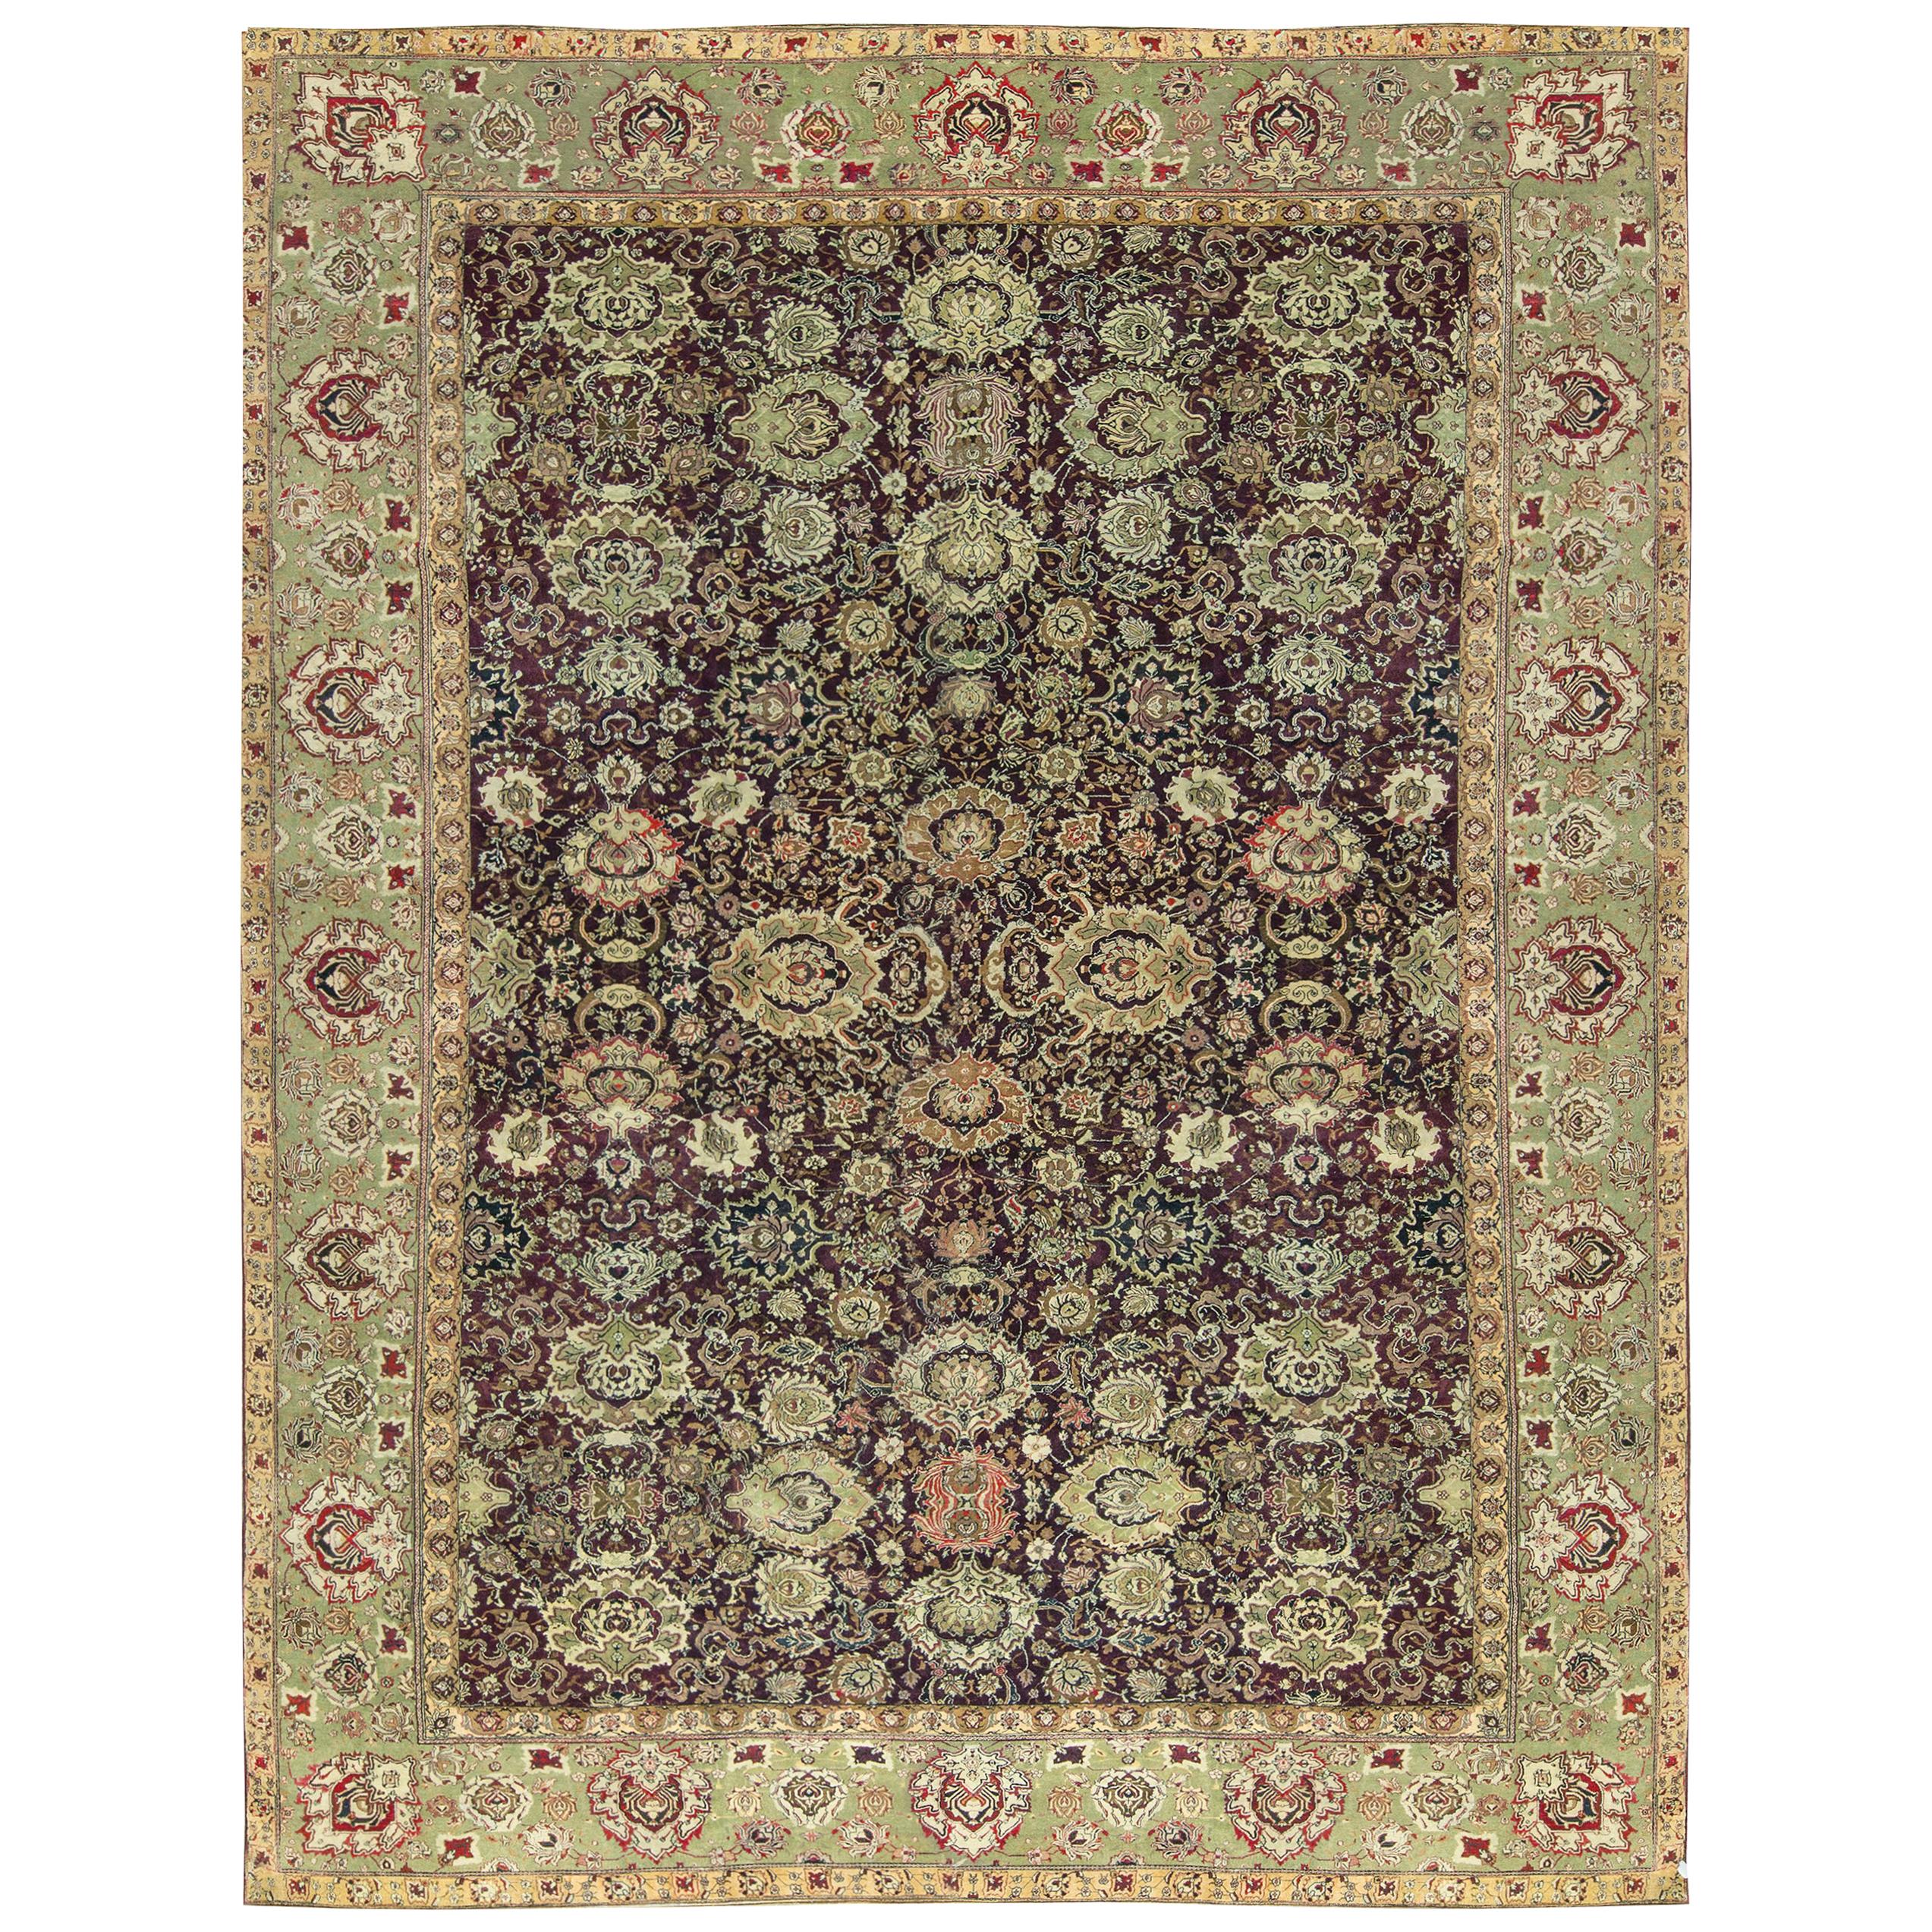 Antique Oversize Indian Agra Rug, circa 1880 14'8" x 19'2" For Sale